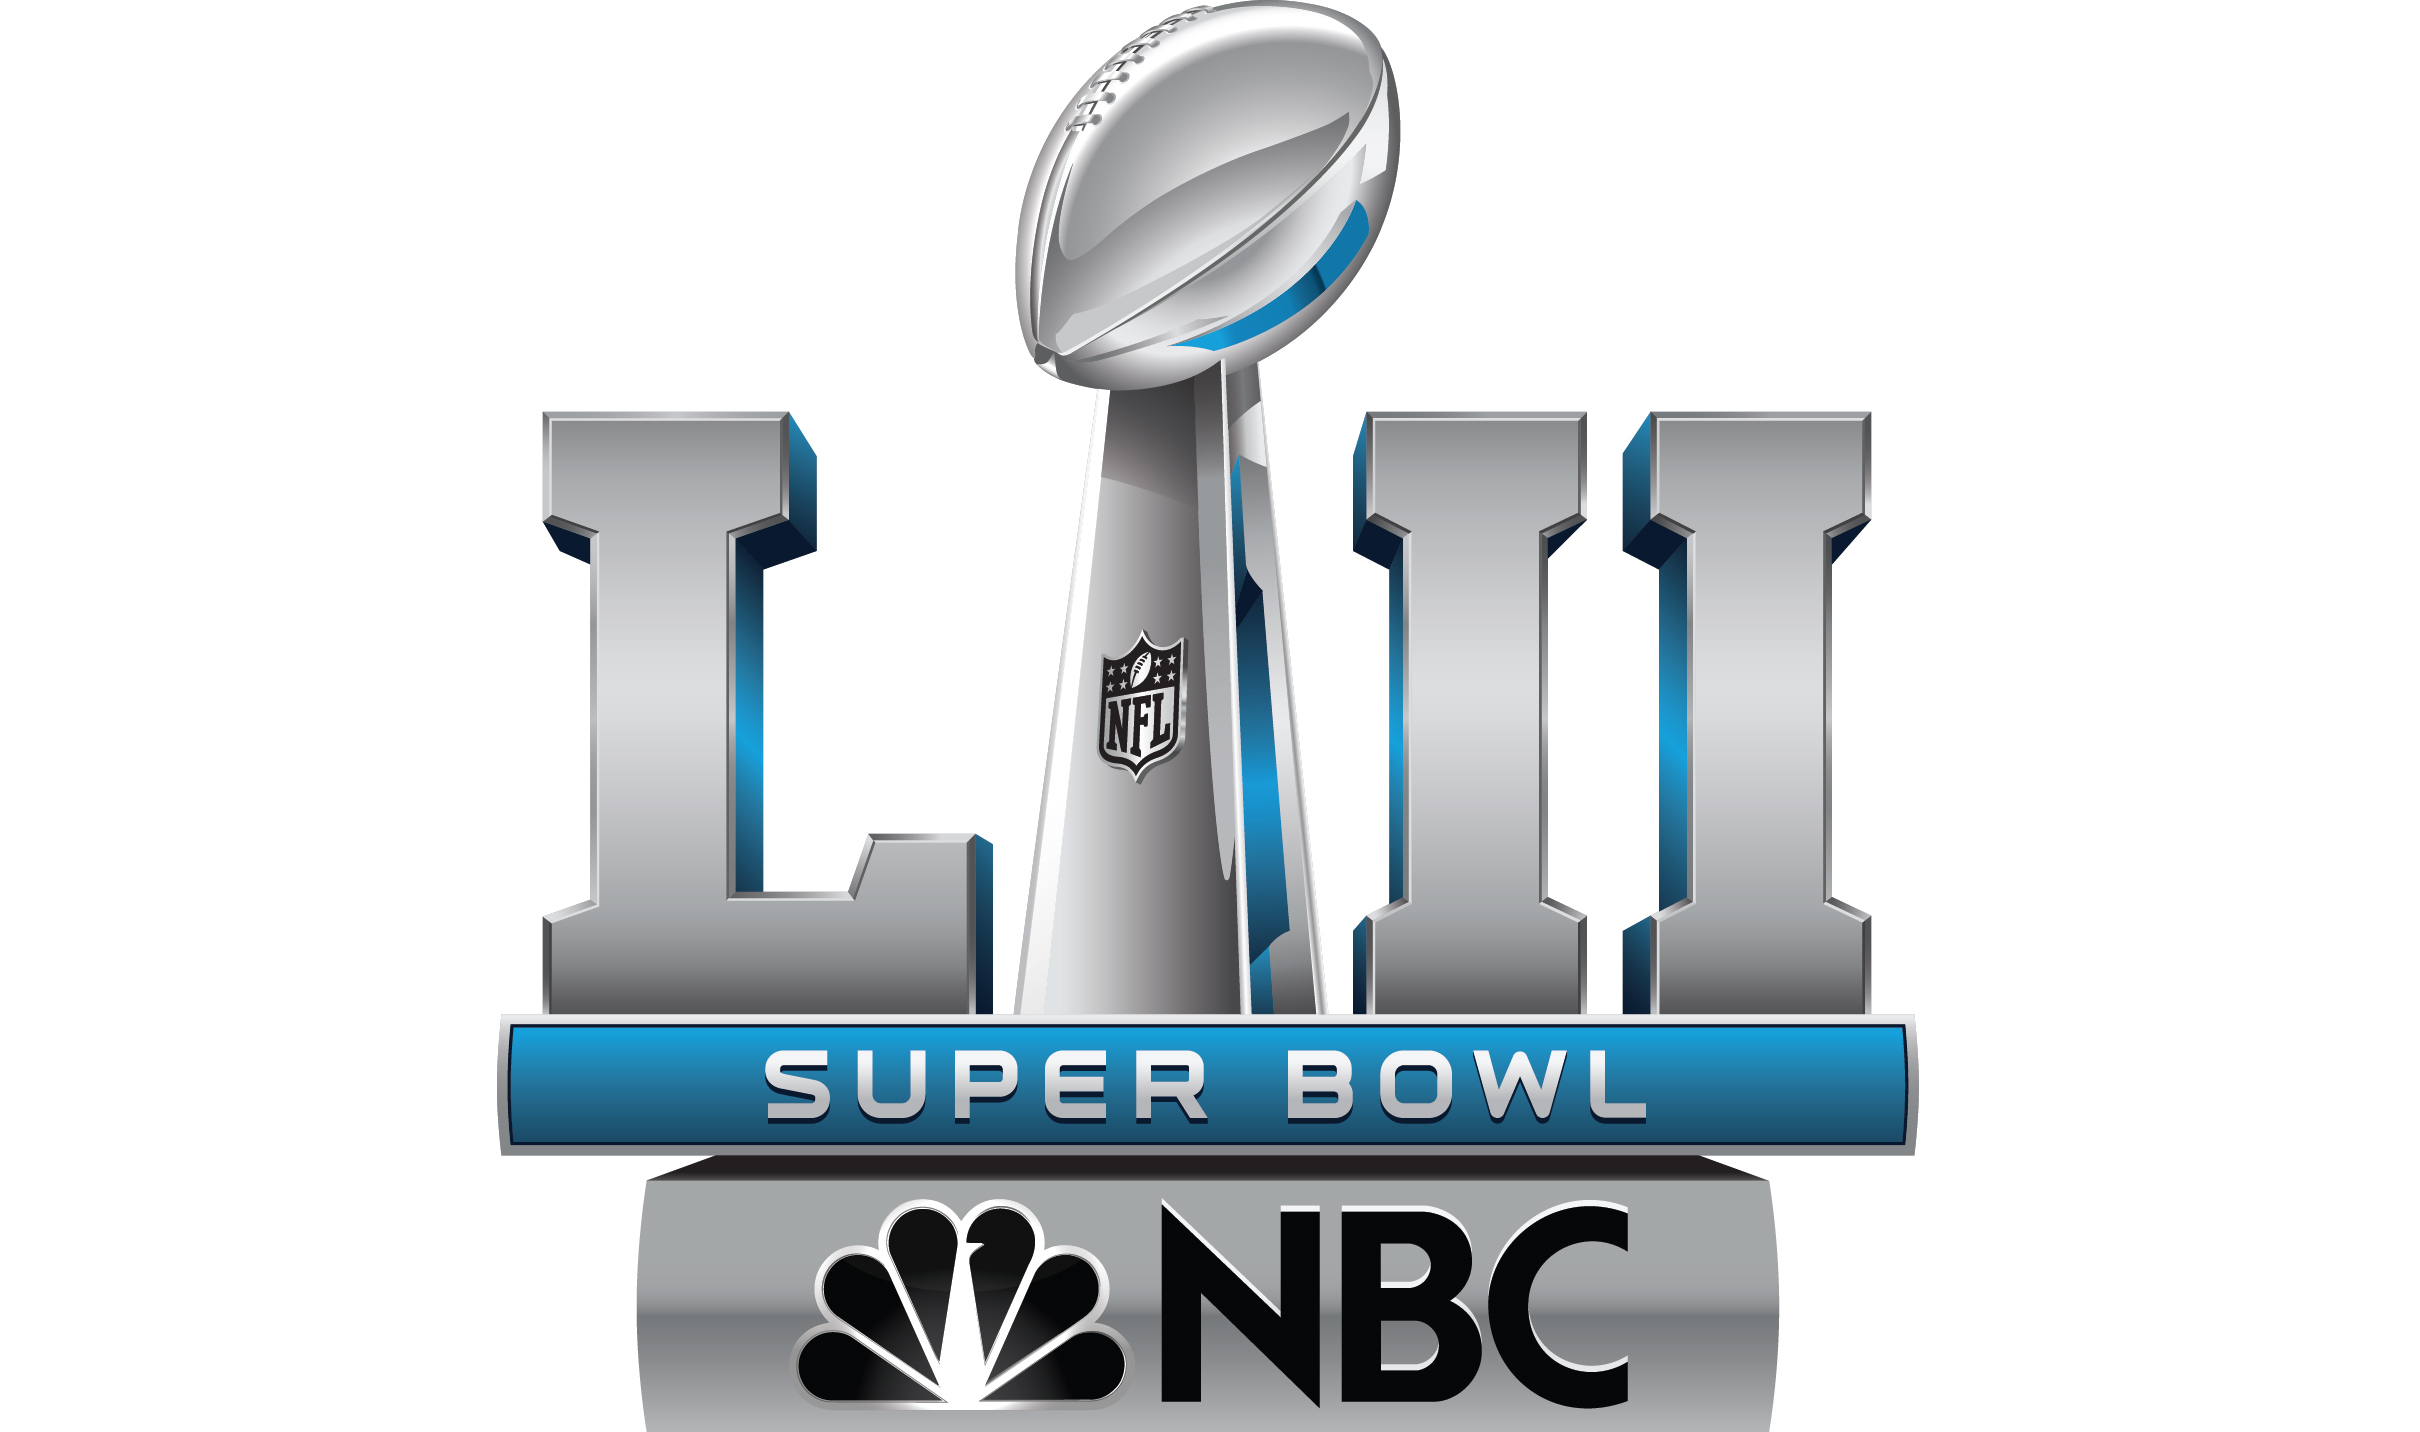 Super Bowl LII: NBC's Production of The Big Game – By the Numbers